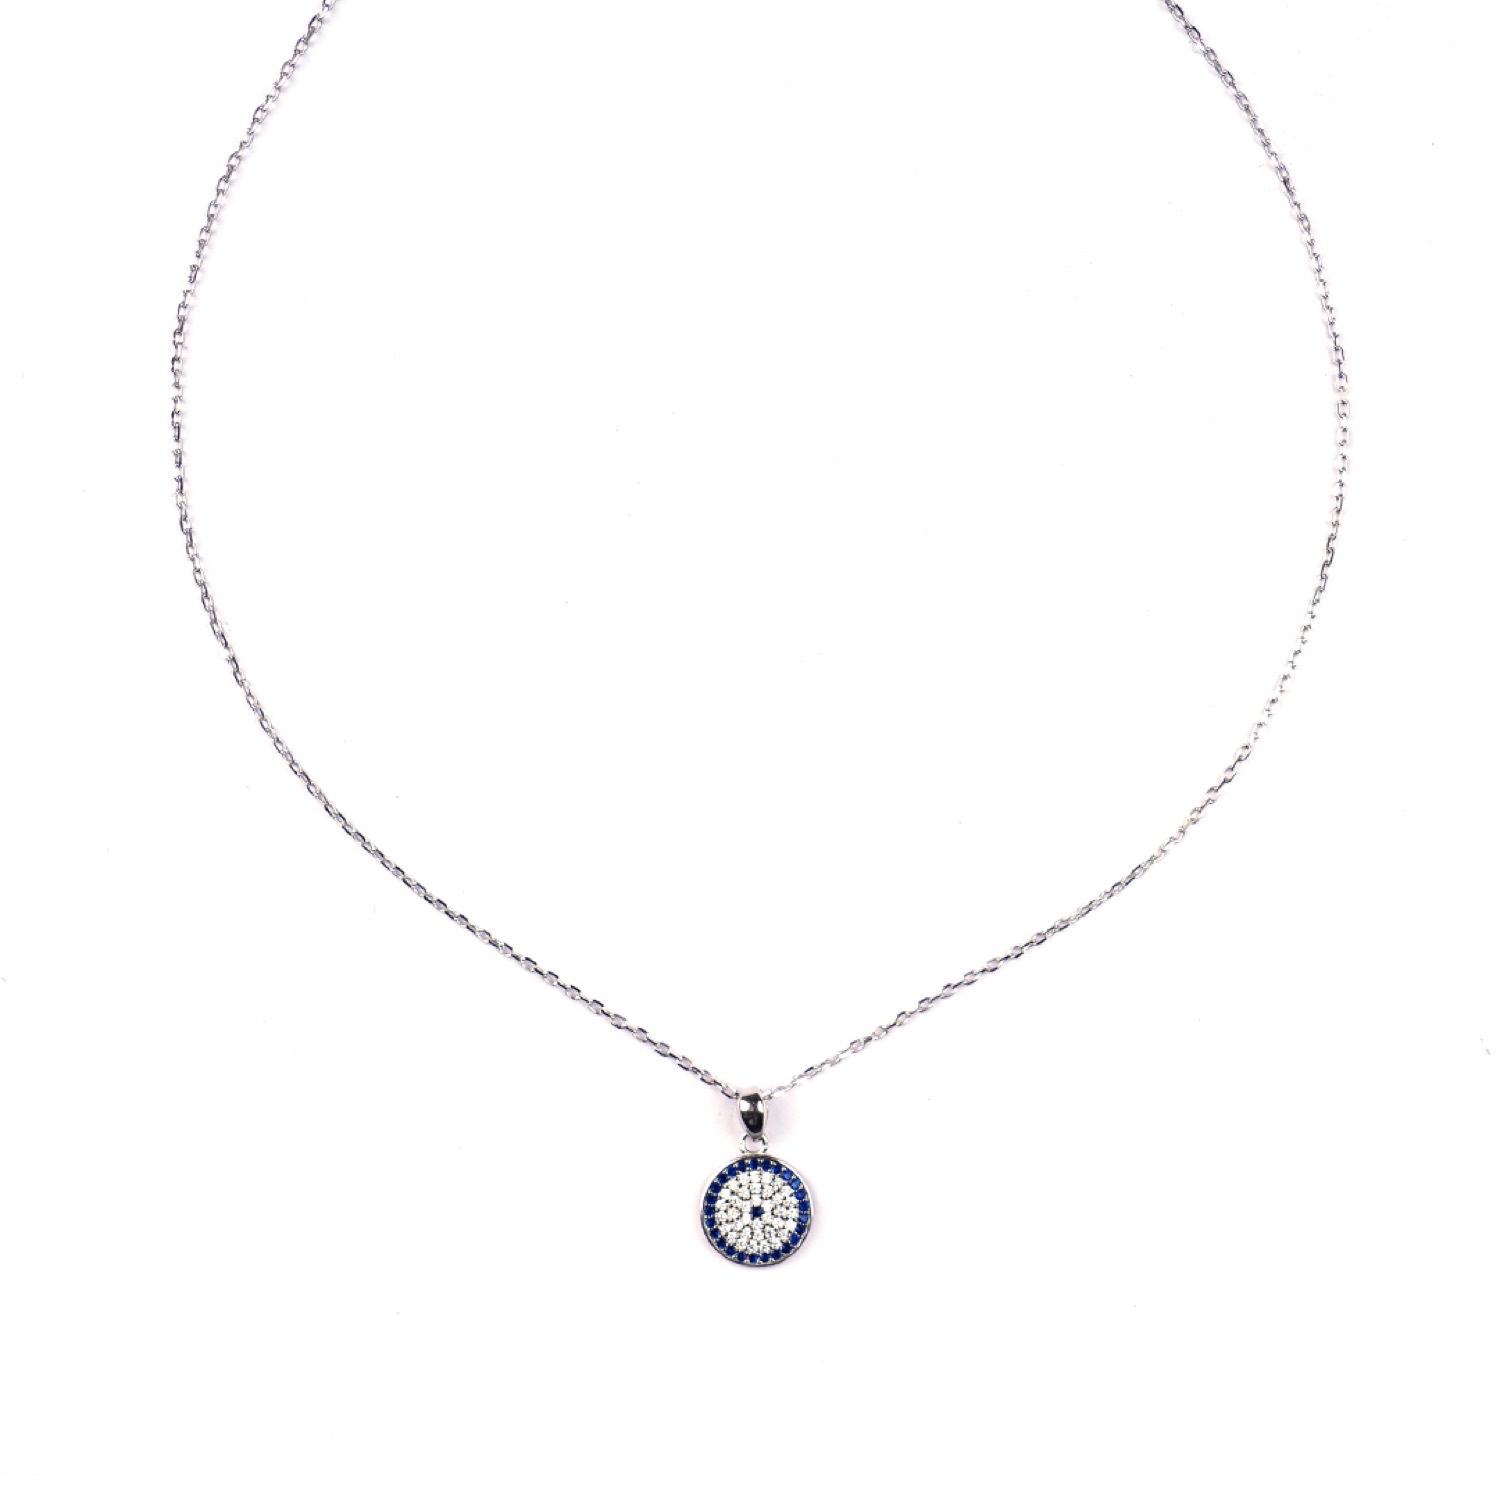 varam_chains_072022_white_and_ink_blue_stone_pendant_silver_chain_with_earrings_1-1